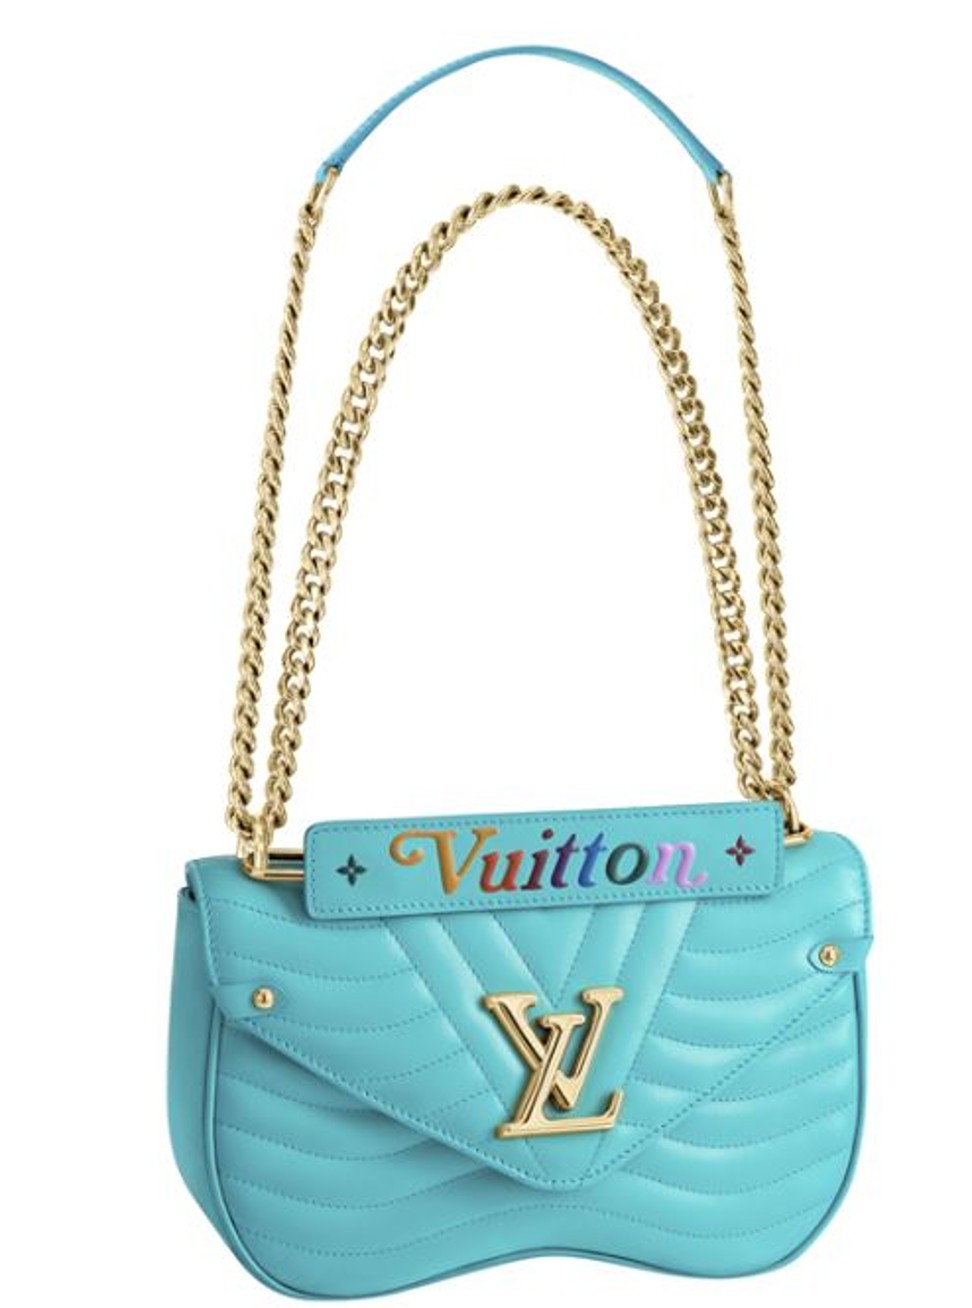 Louis Vuitton New Wave Collection